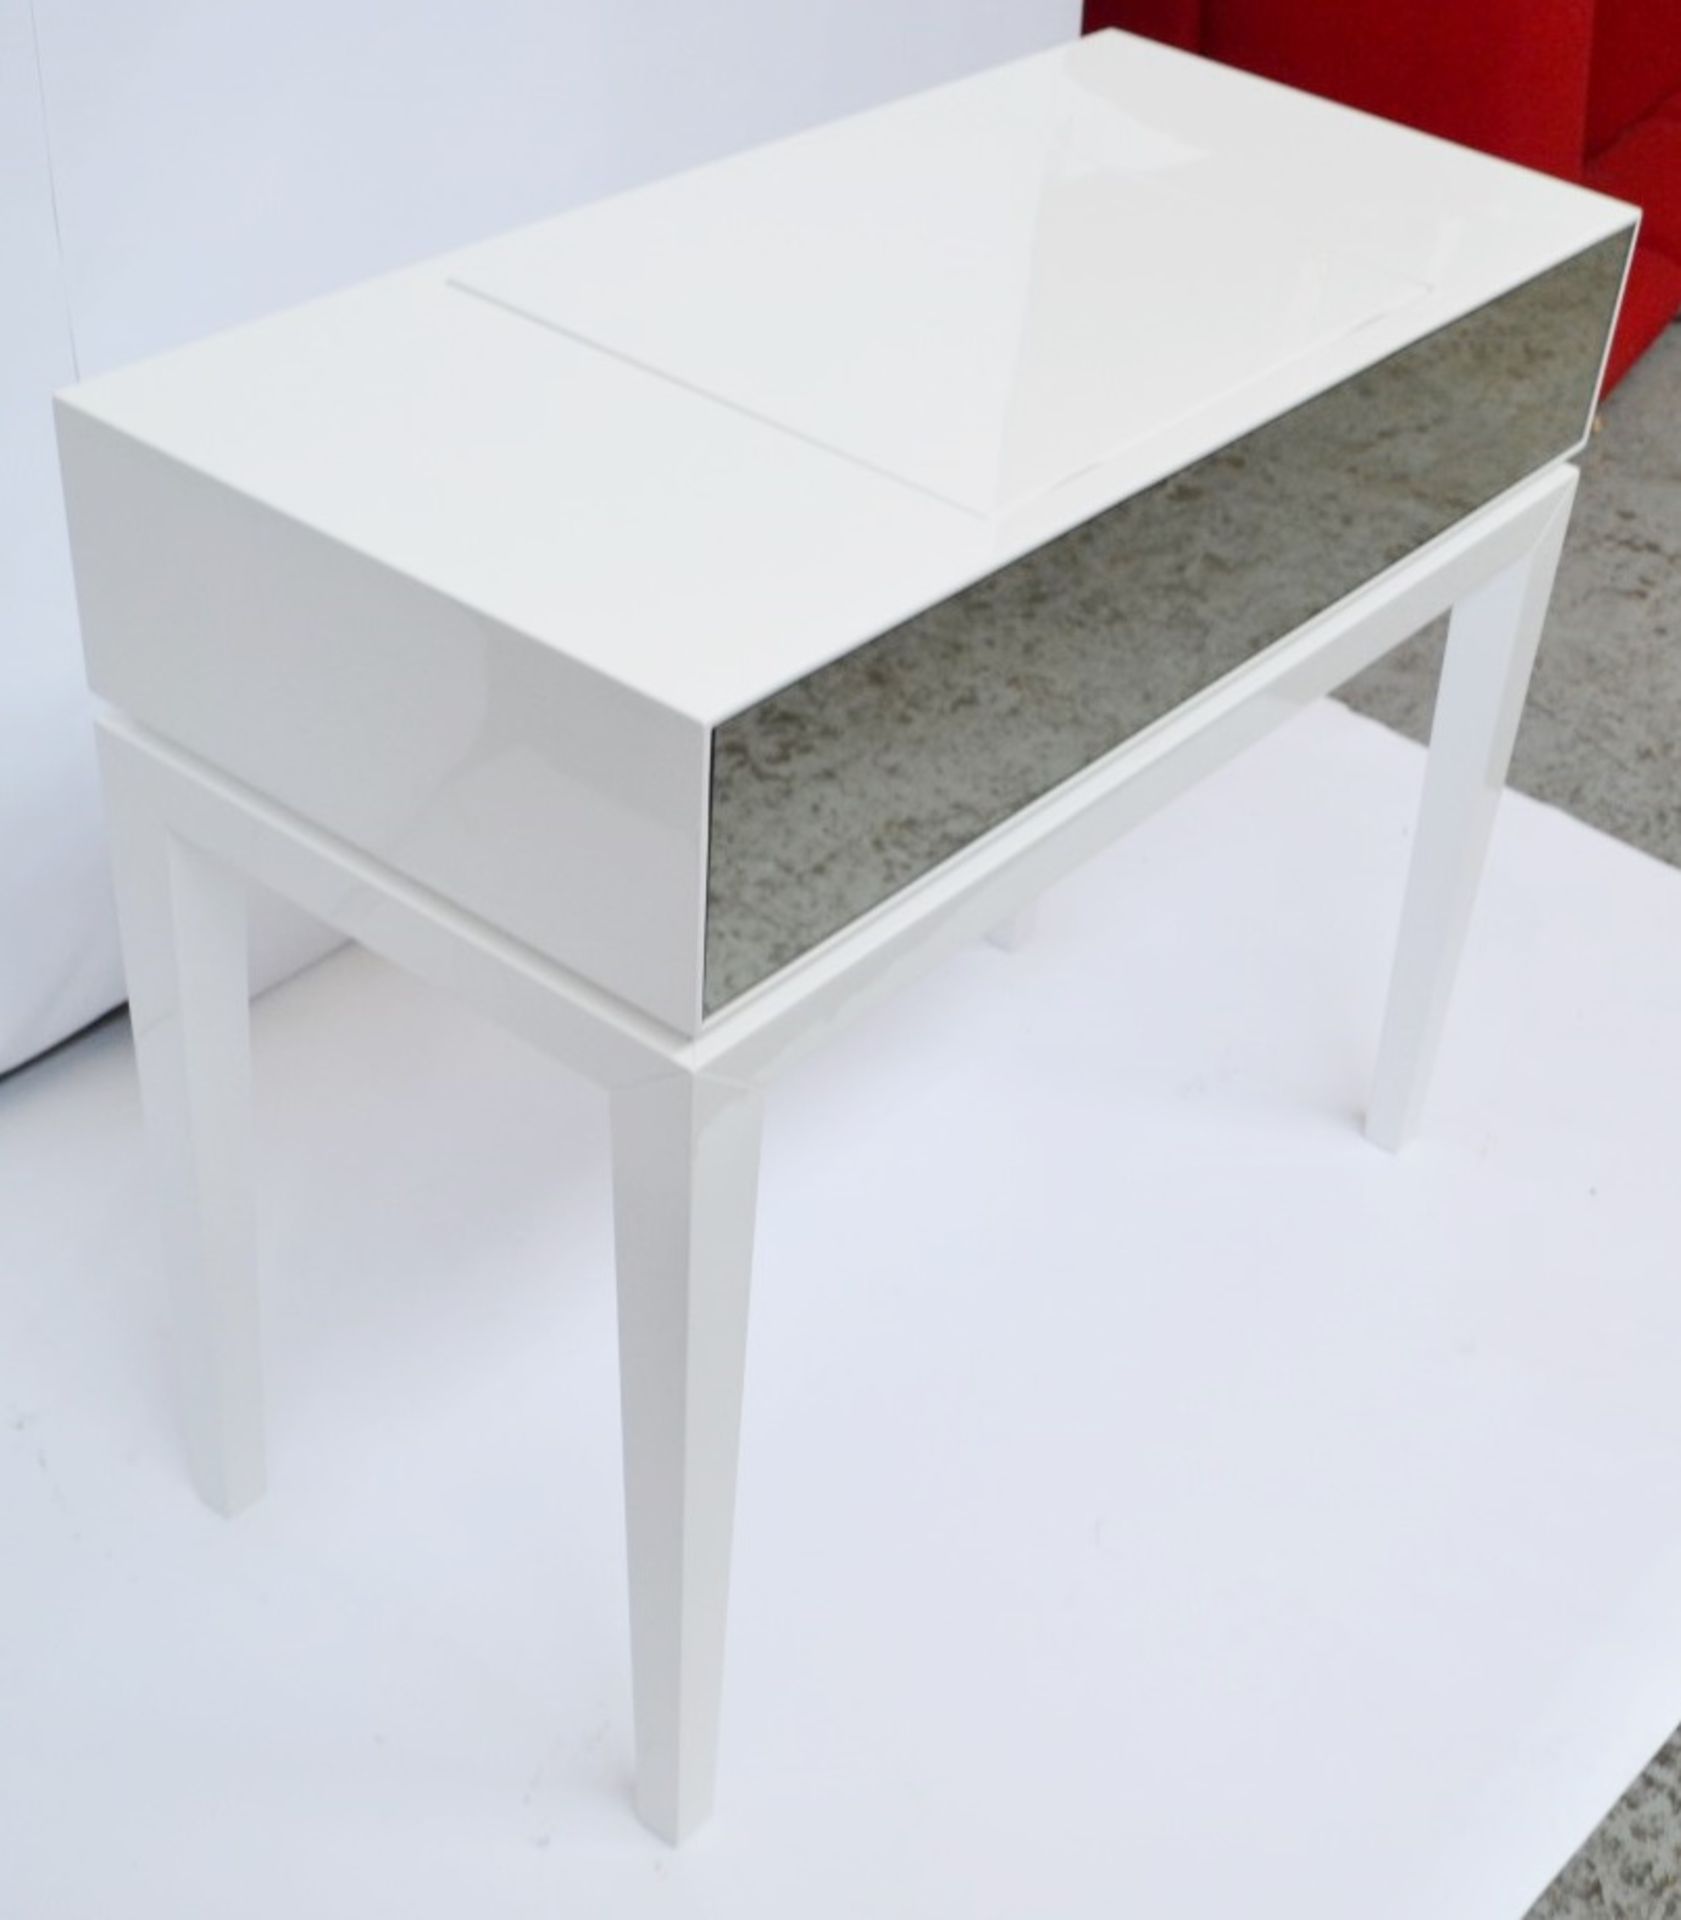 1 x FRATO Chicago Dressing Console - White Lacquered - Dimensions: H75 x W85 x D40cm - Ref: - Image 4 of 6